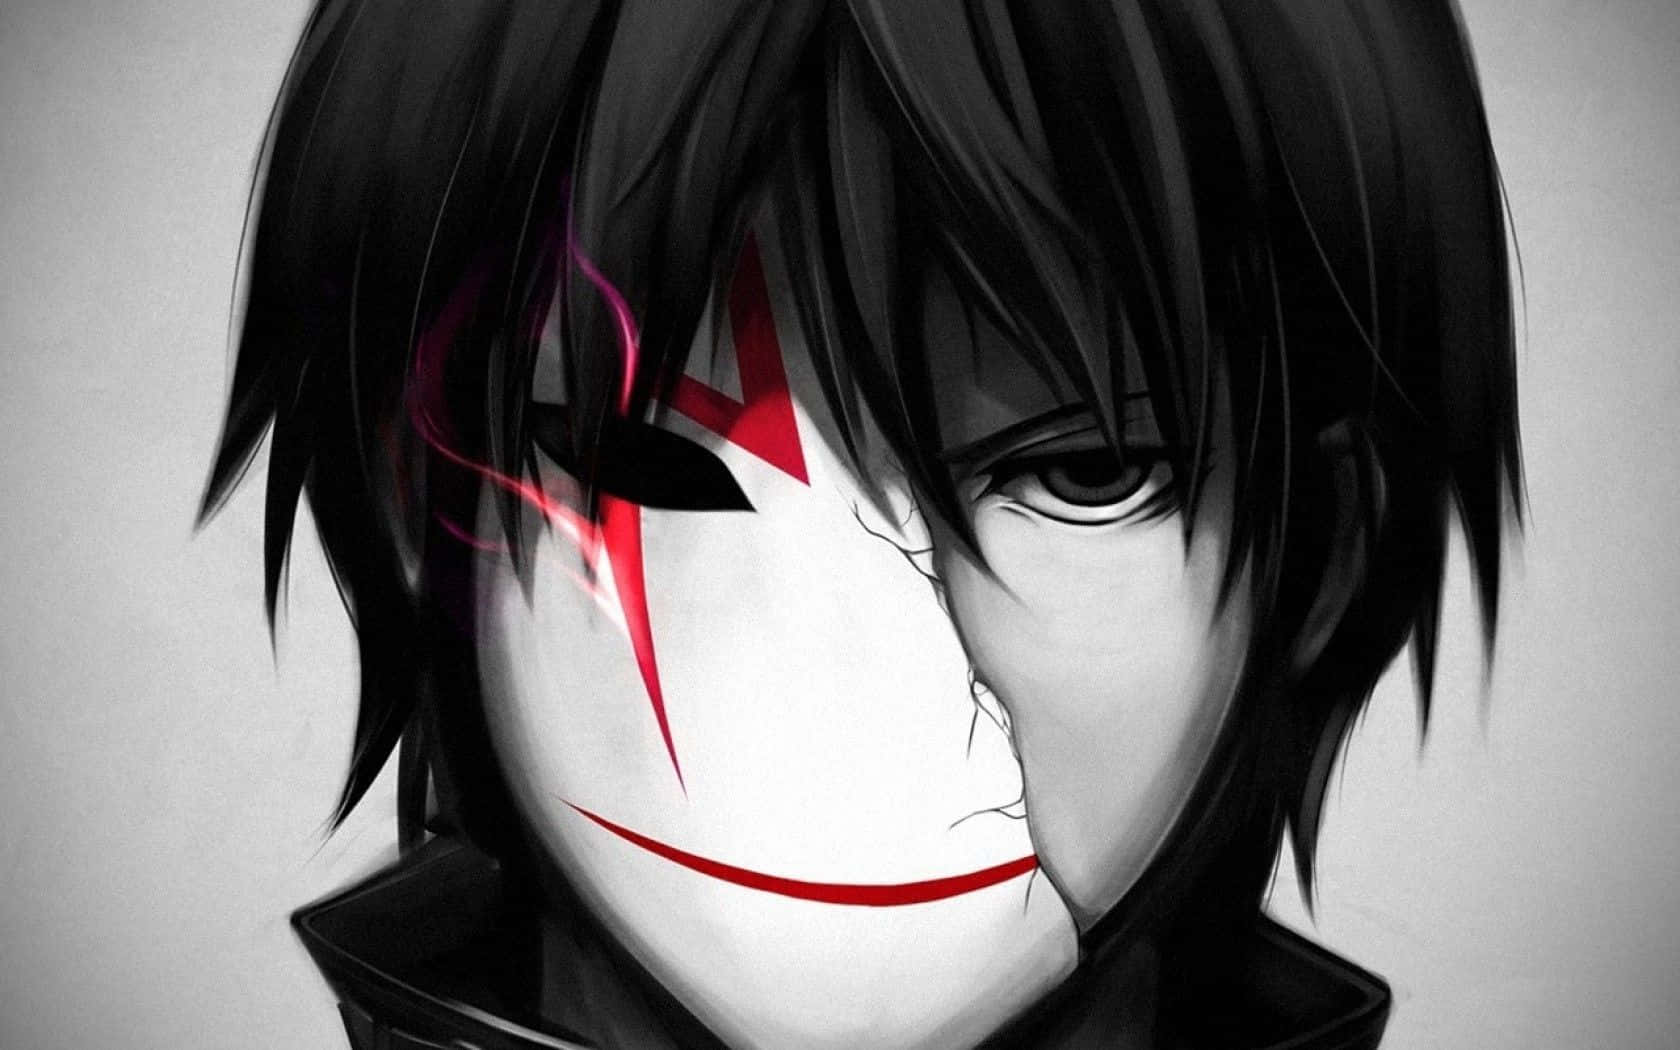 Dark and Atmospheric, A Scary Anime Boy Wallpaper